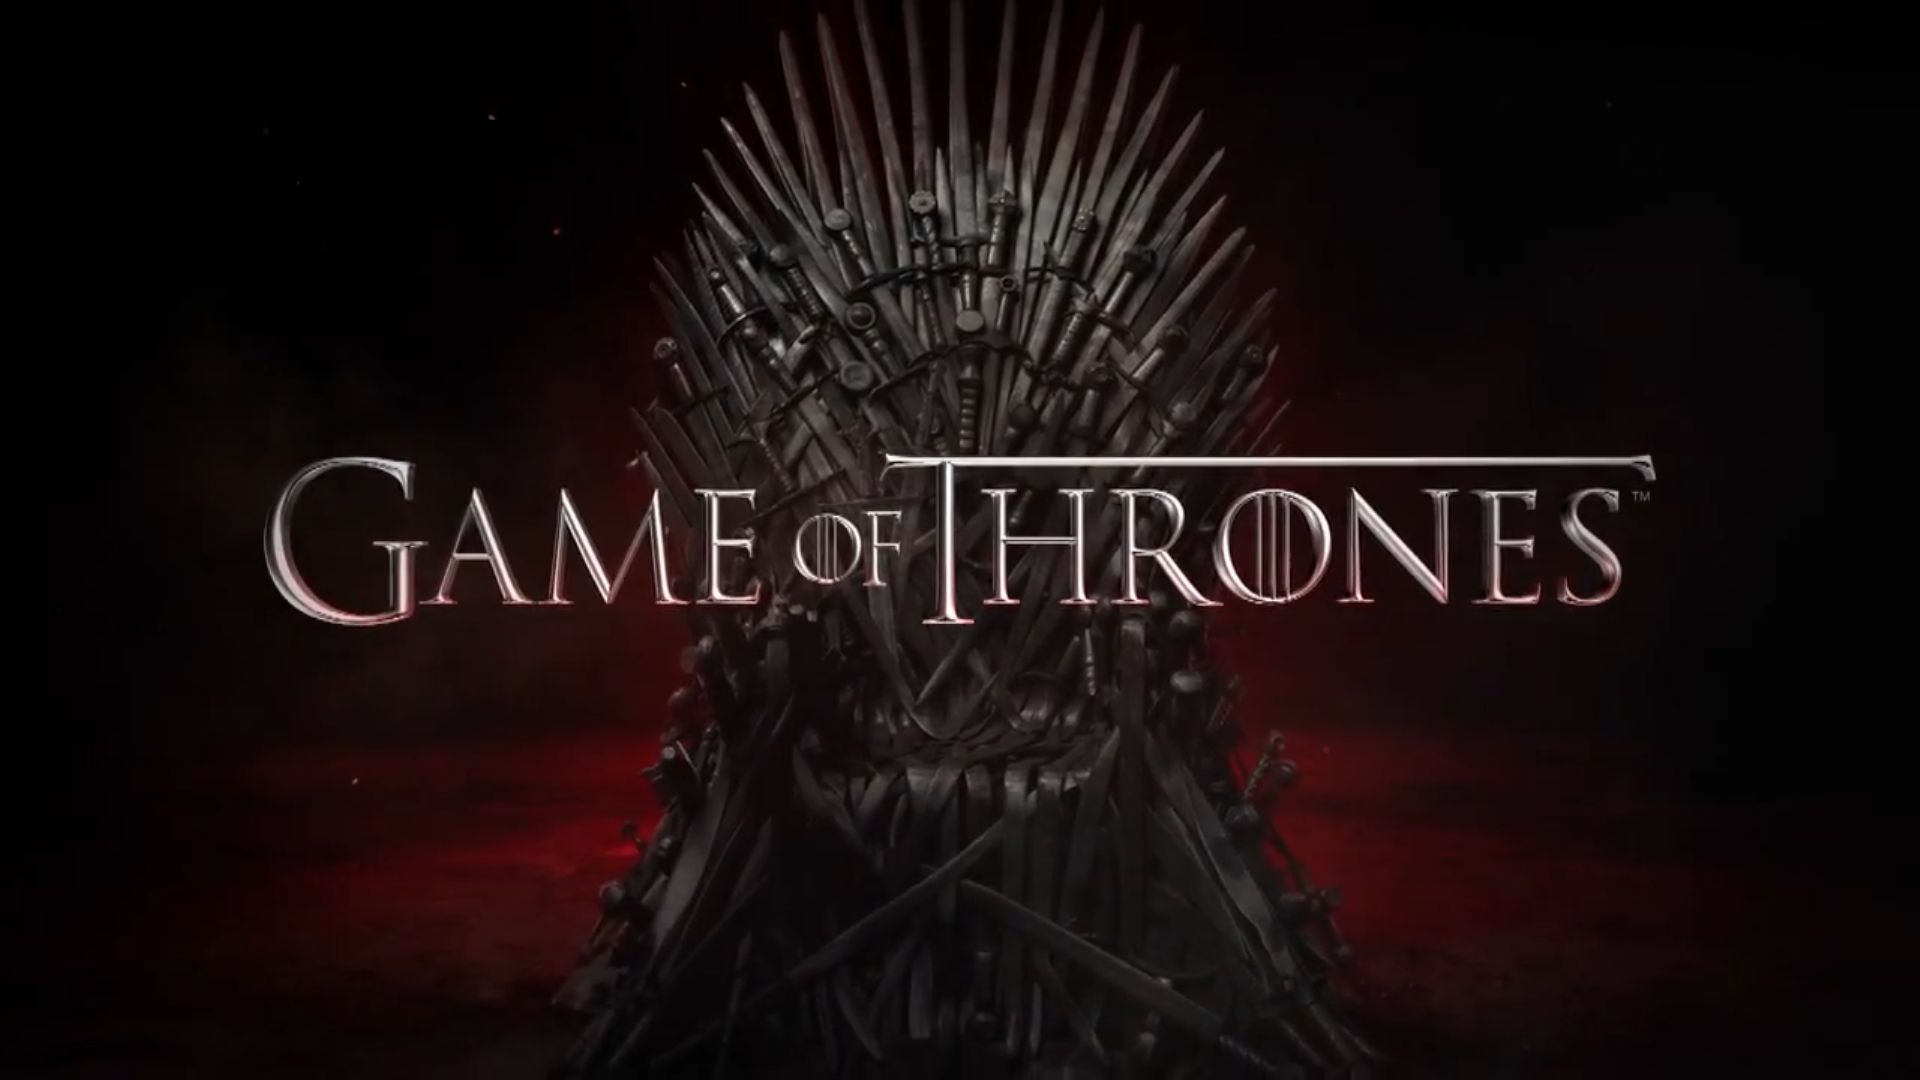 HBO Game of Thrones Wallpaper 1920x1080